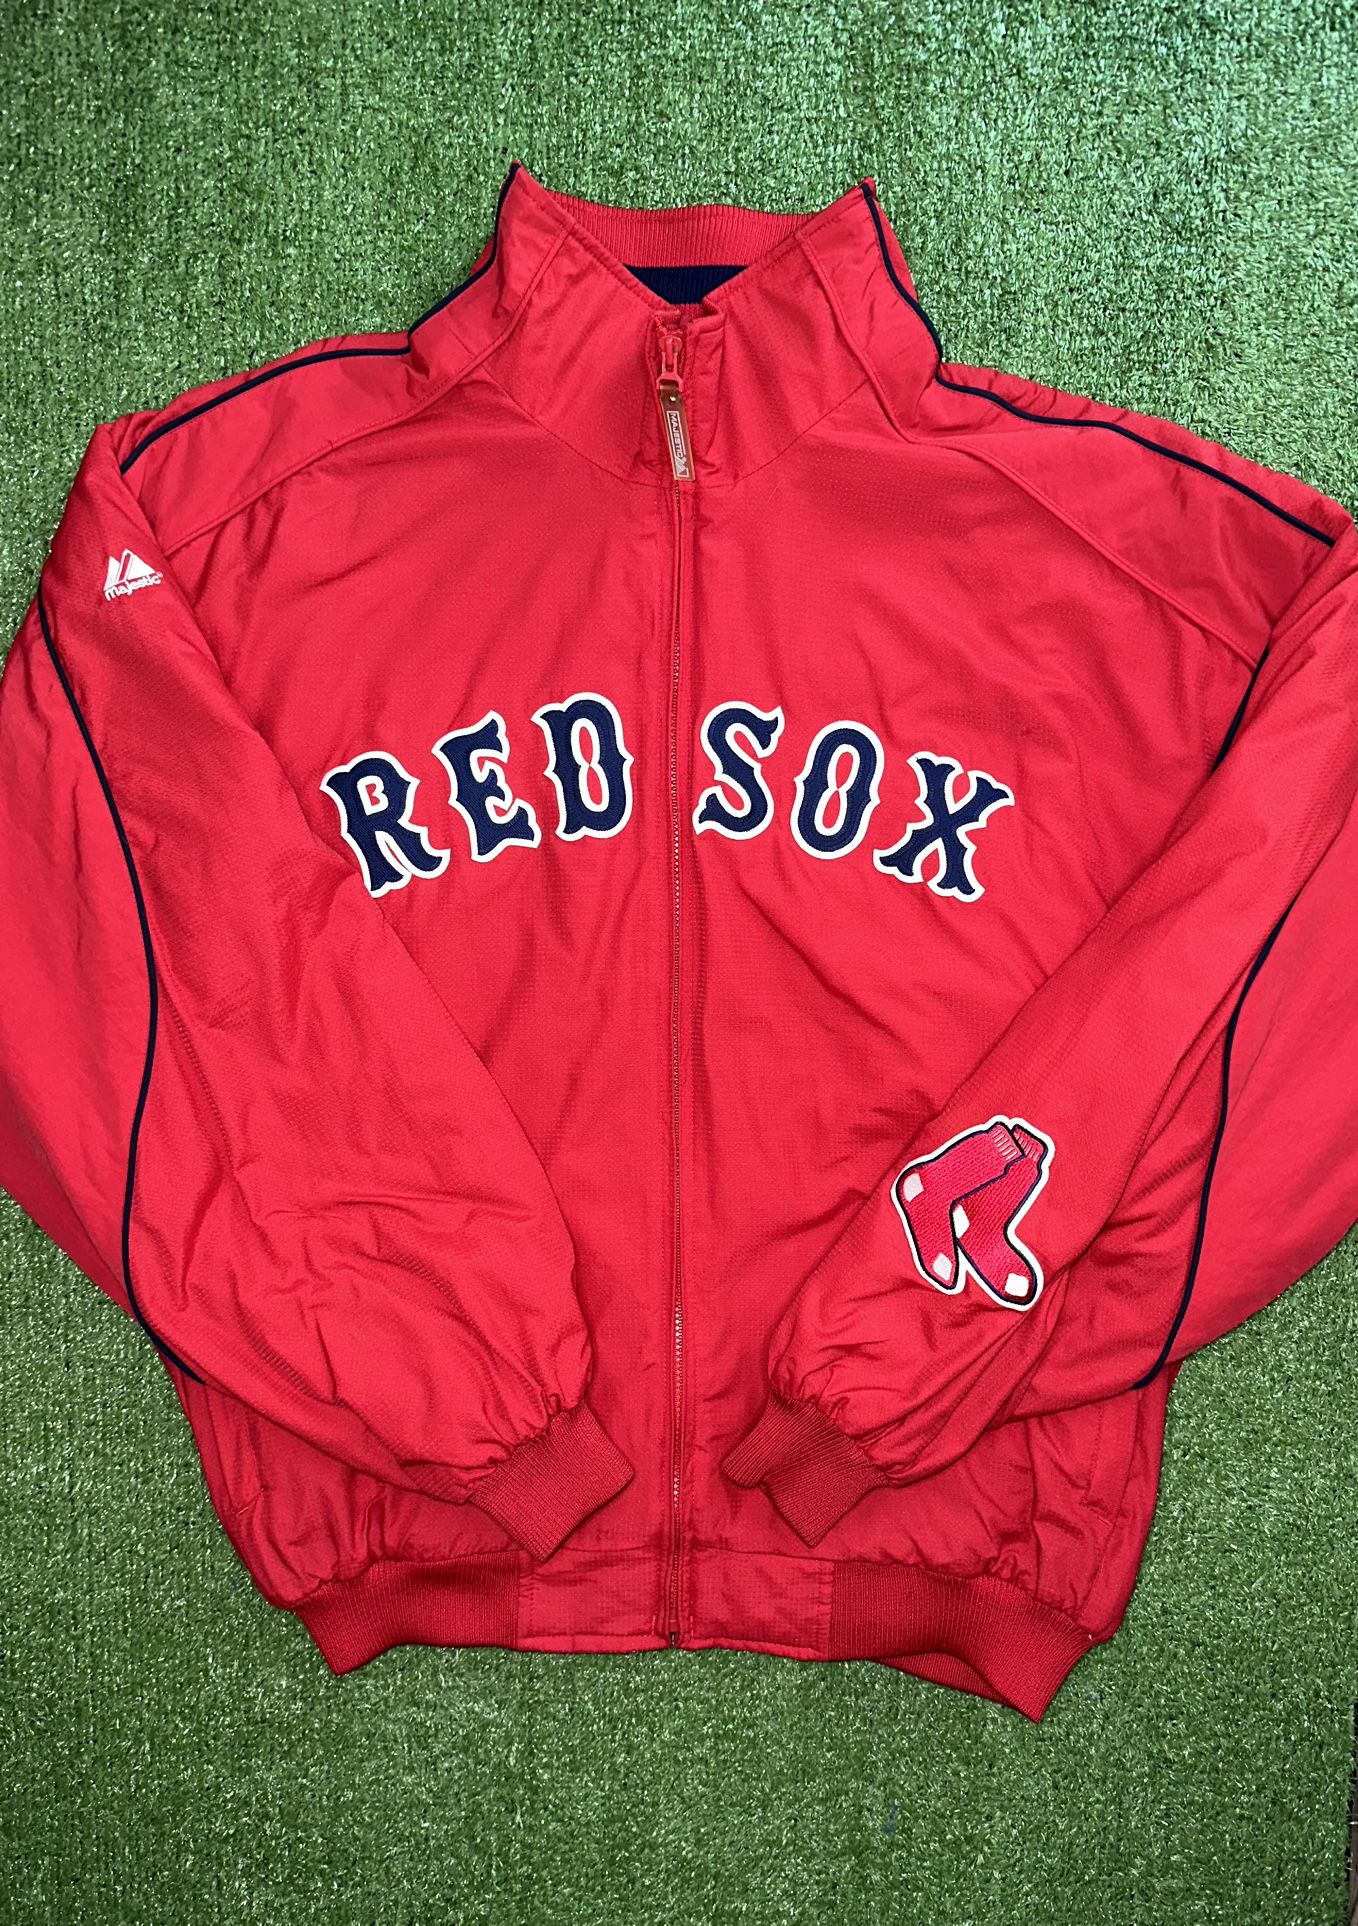 Mint Condition Majestic Boston Red Sox Authentic Collection MLB Team Dugout JACKET XL